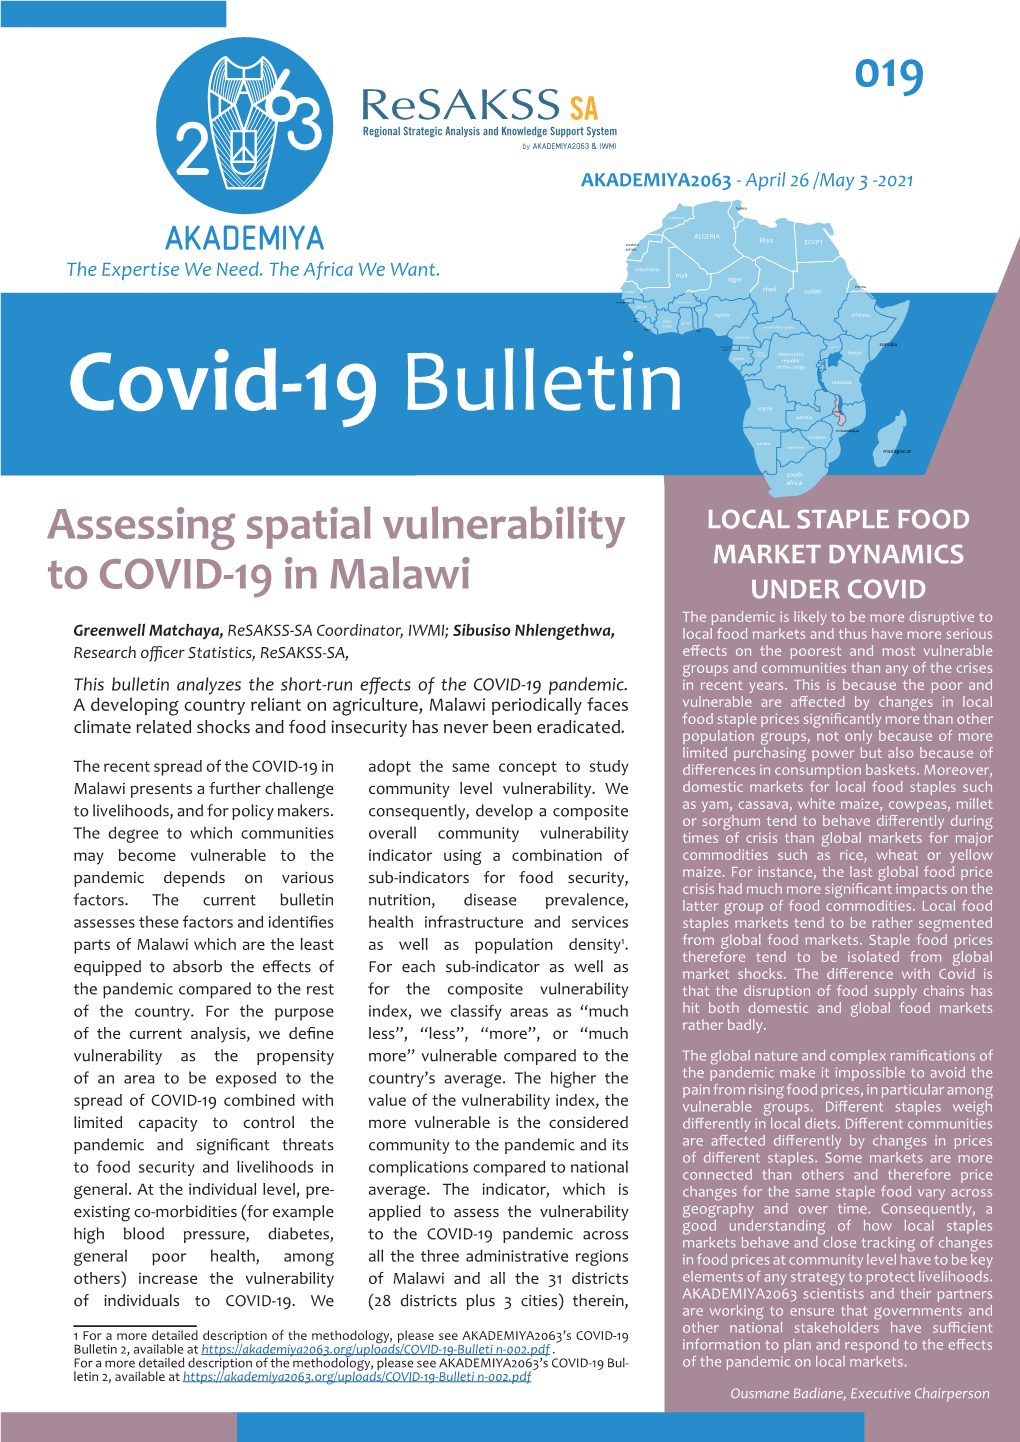 Assessing Spatial Vulnerability to COVID-19 in Malawi